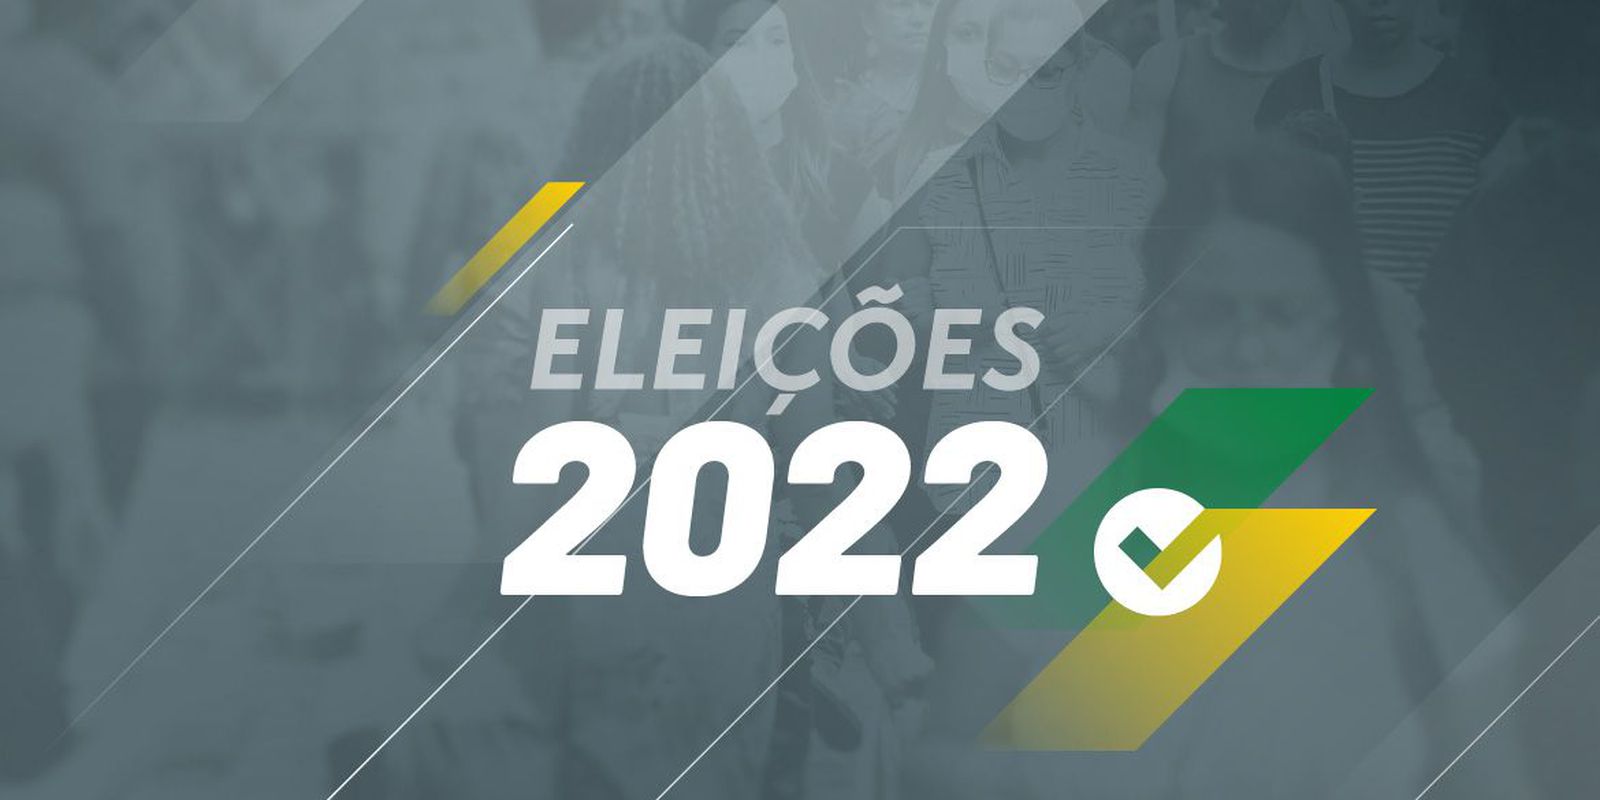 Find out who are the candidates for governor of Pernambuco